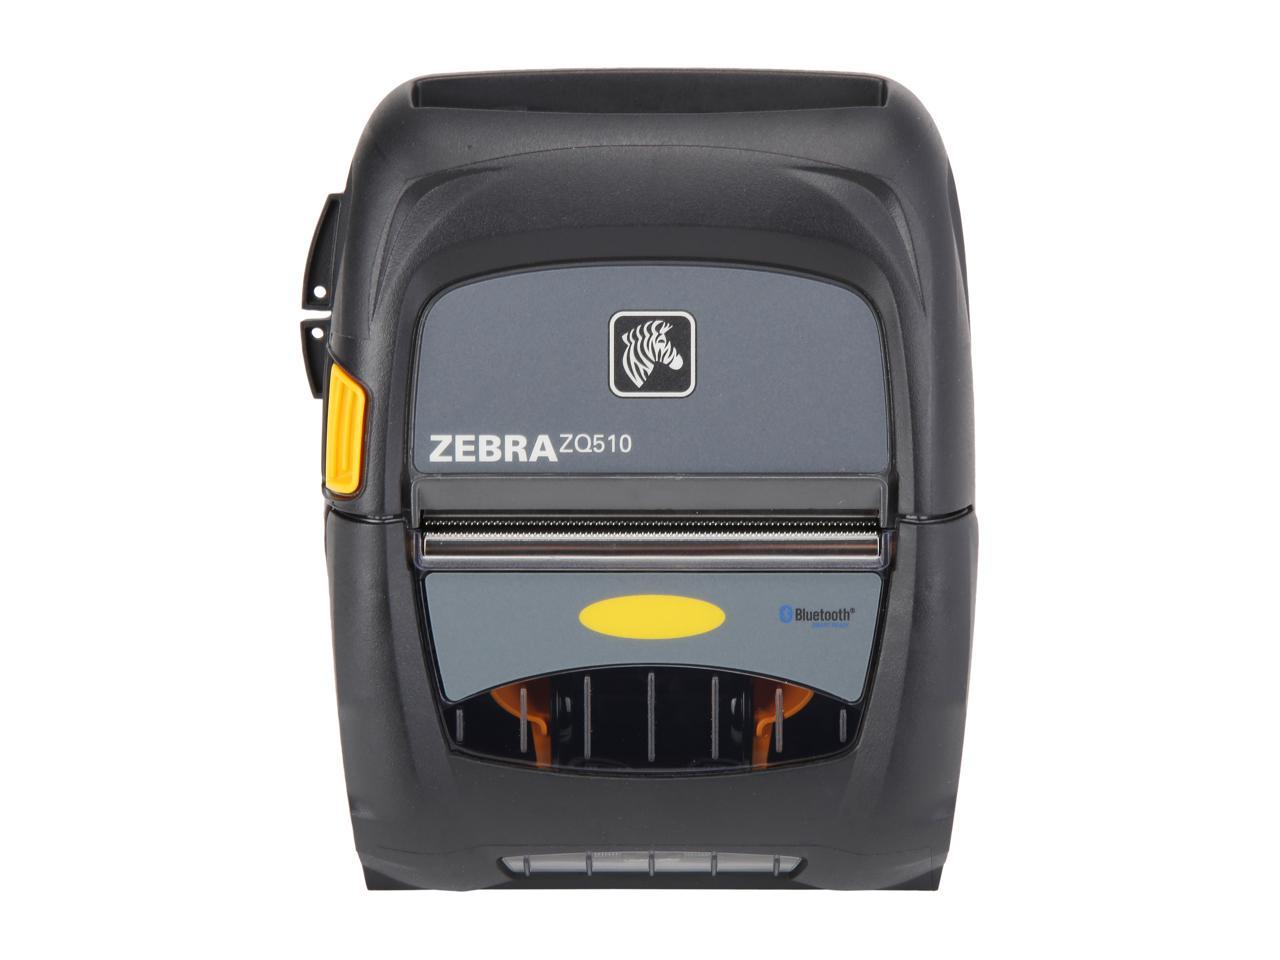 Zebra Zq510 3 Mobile Direct Thermal Receipt And Label Printer 203 Dpi Bluetooth 40 Linered 2549